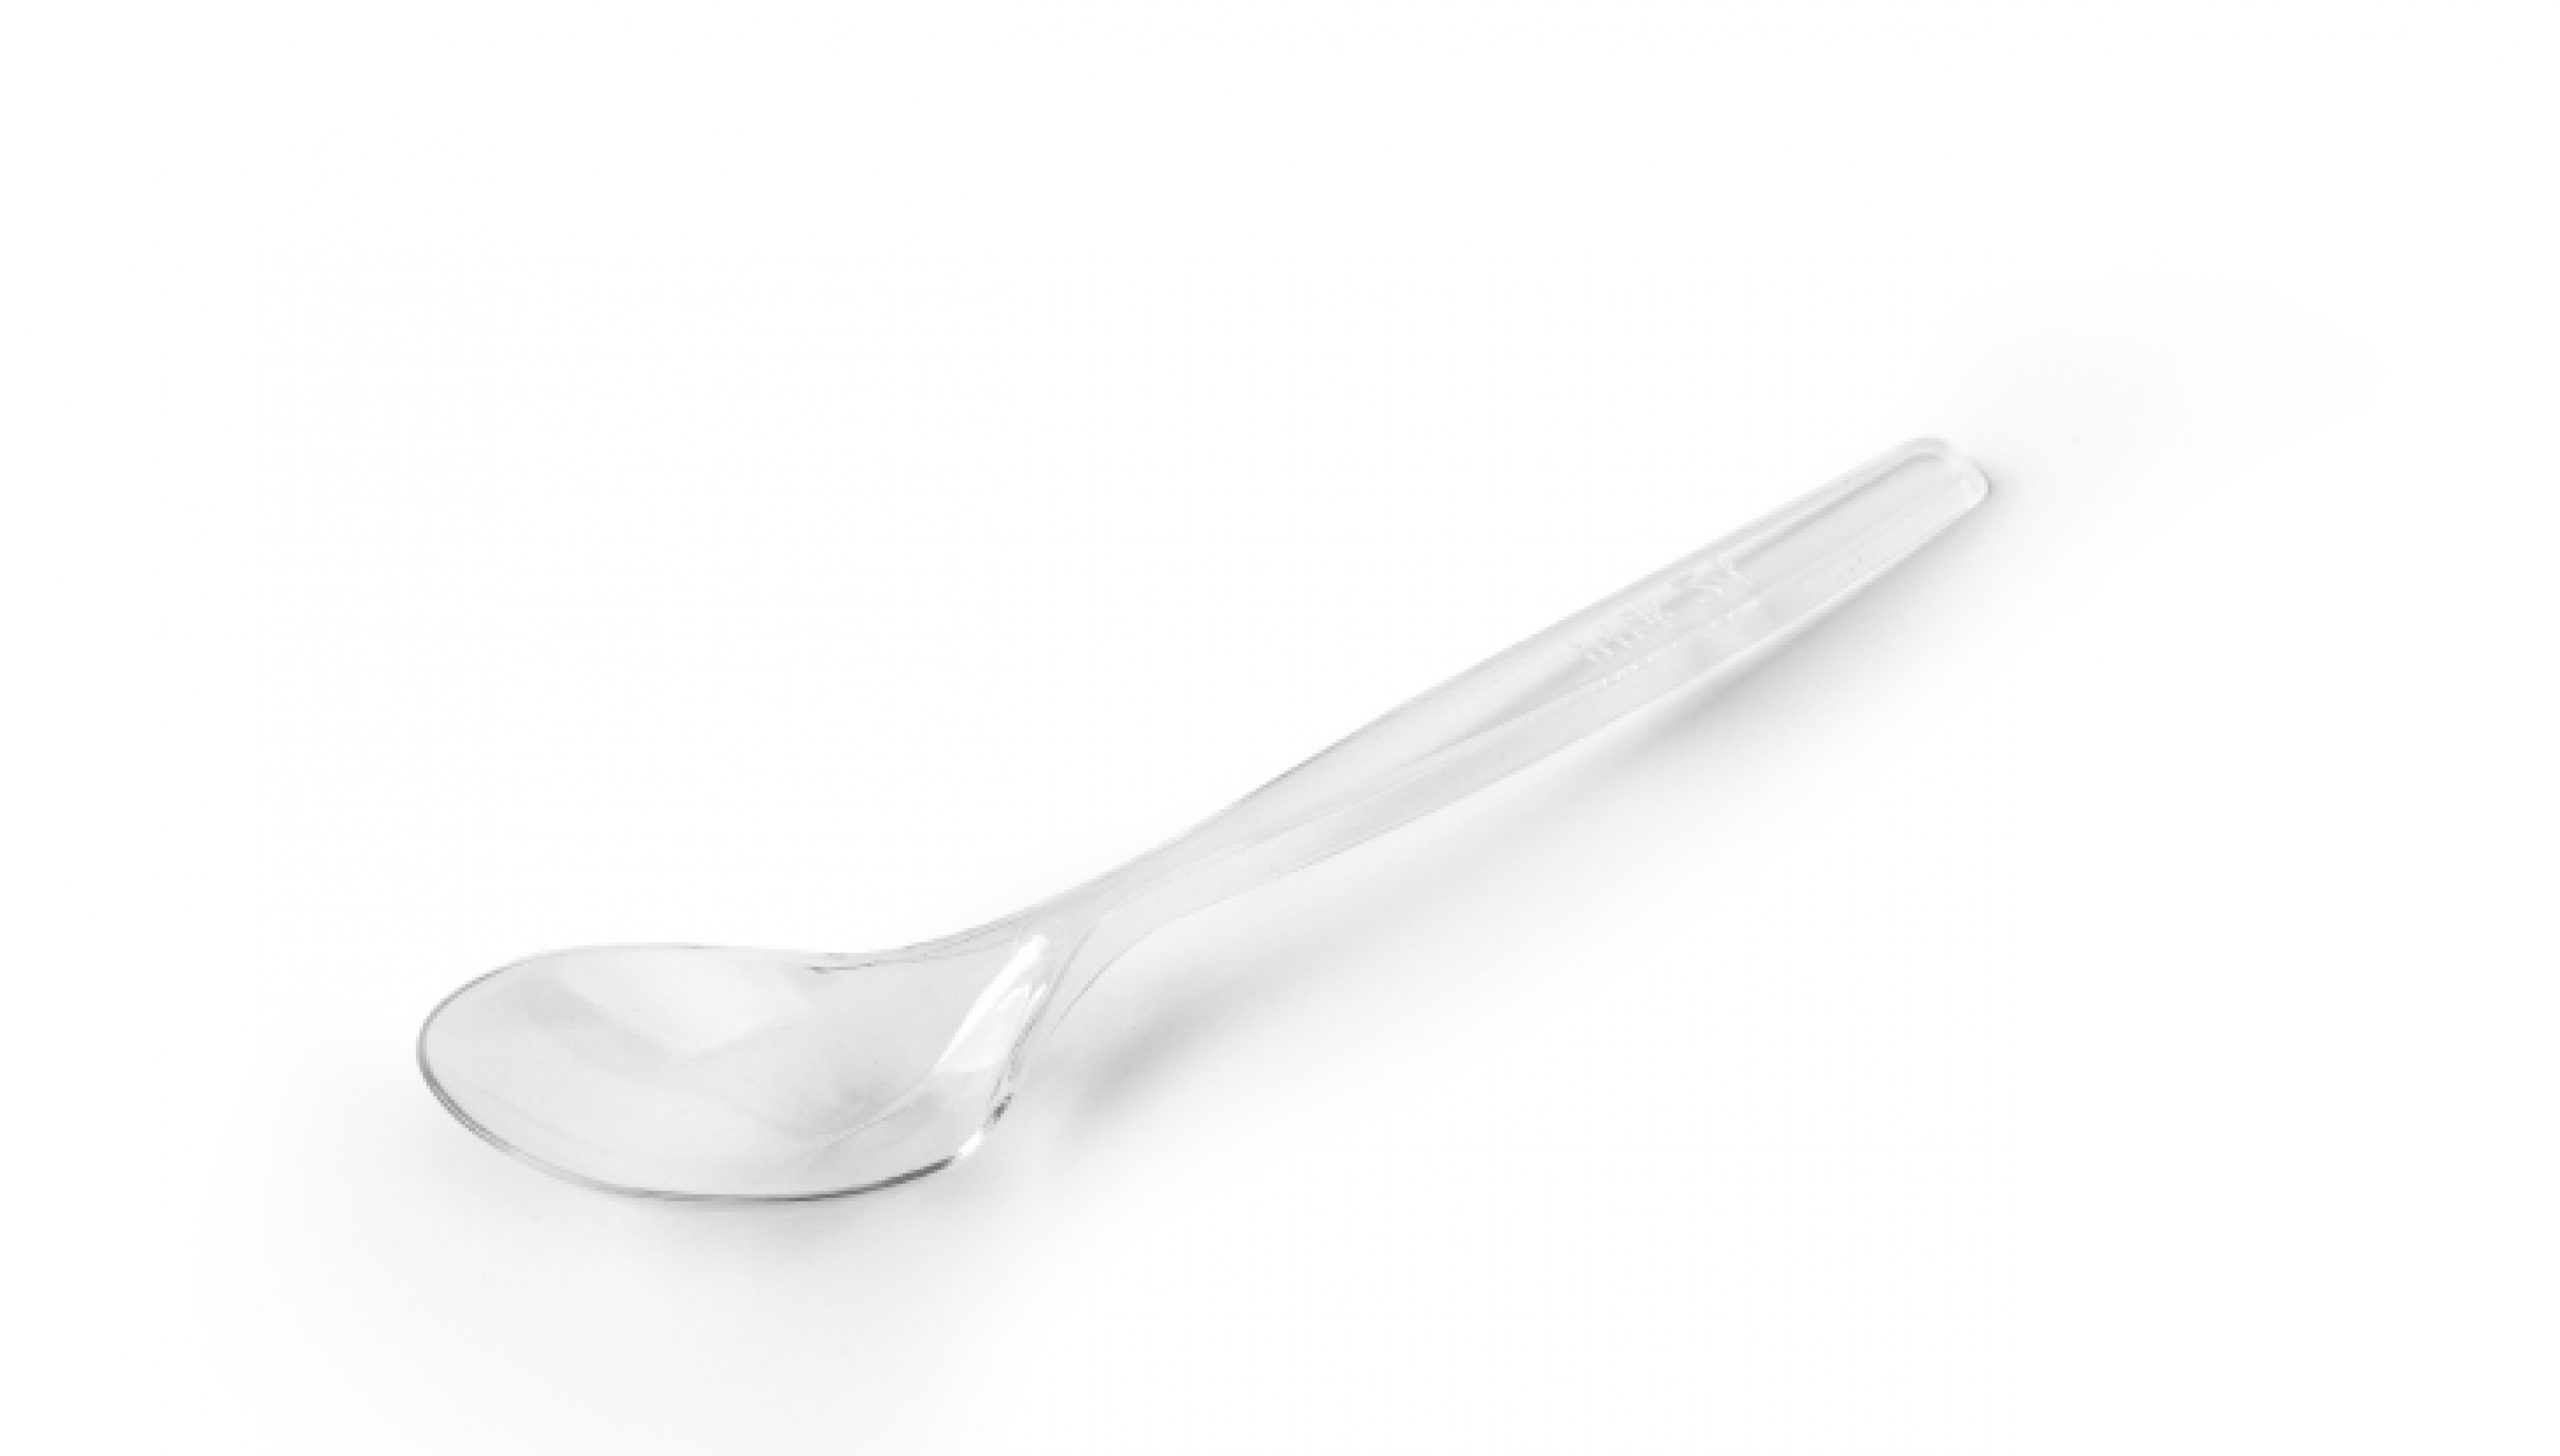 0.60 Small Spoon